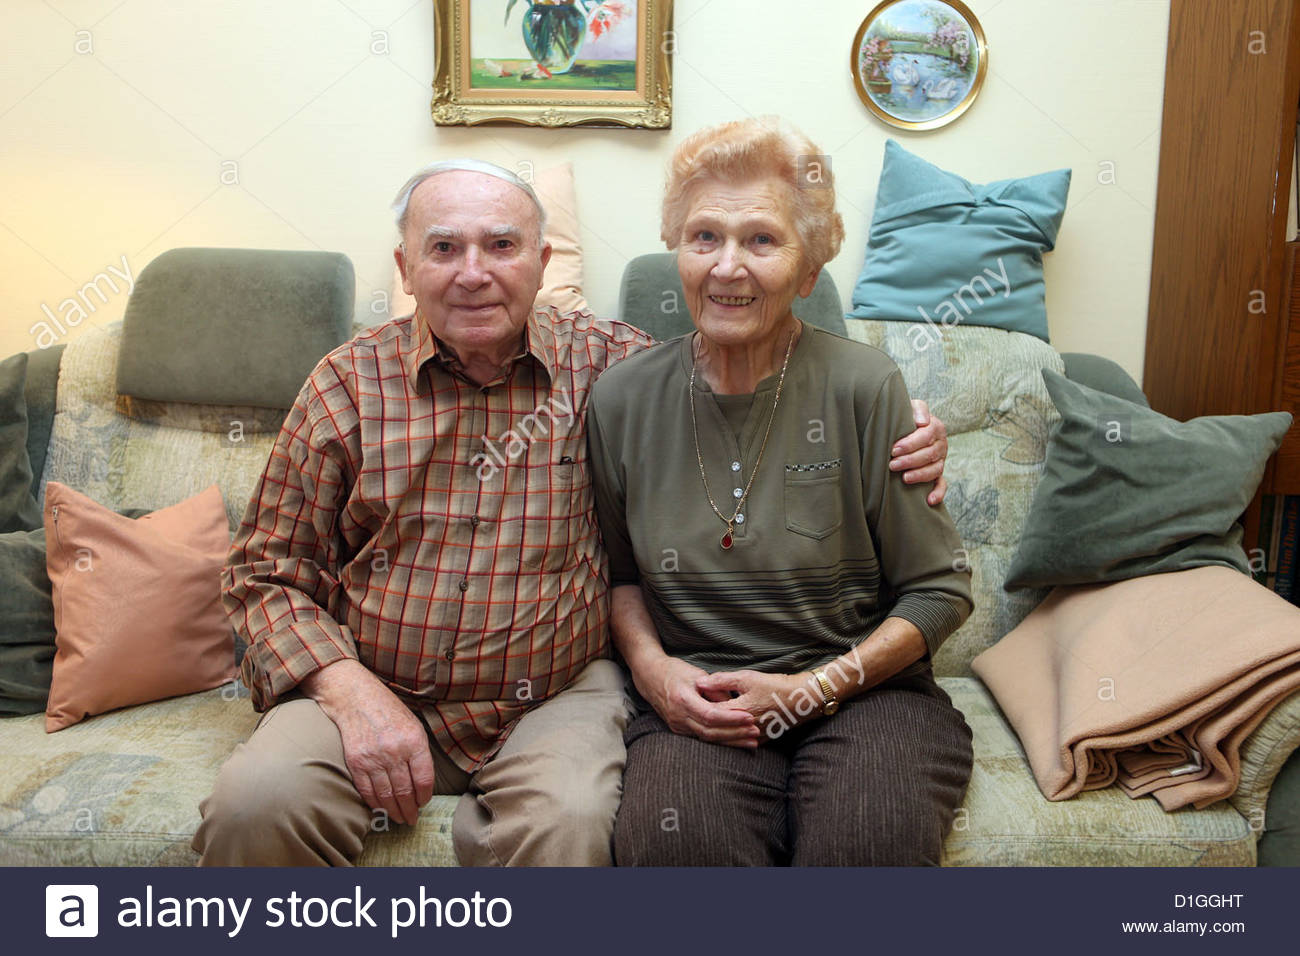 heinz and martha fiedler sit in their room of the senior citizens D1GGHT